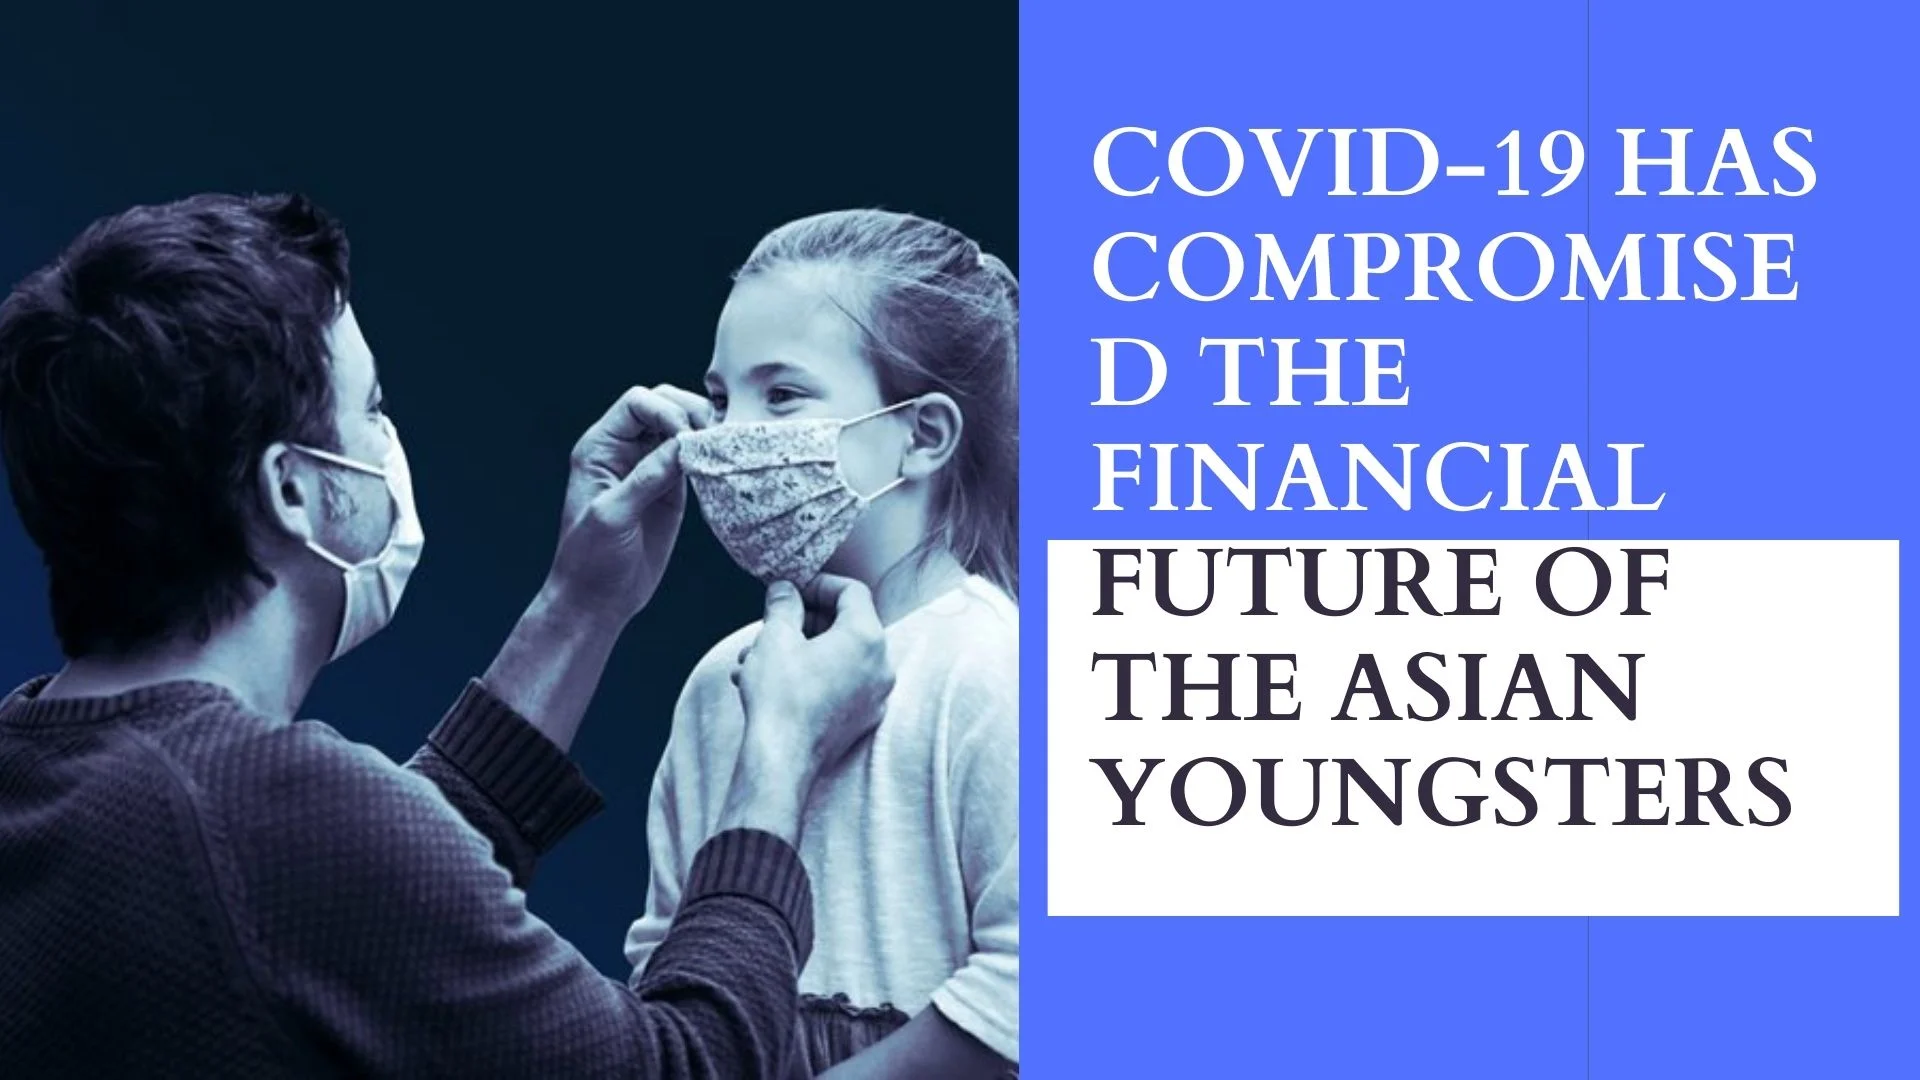 You are currently viewing COVID-19 HAS COMPROMISED THE FINANCIAL FUTURE OF THE ASIAN YOUNGSTERS